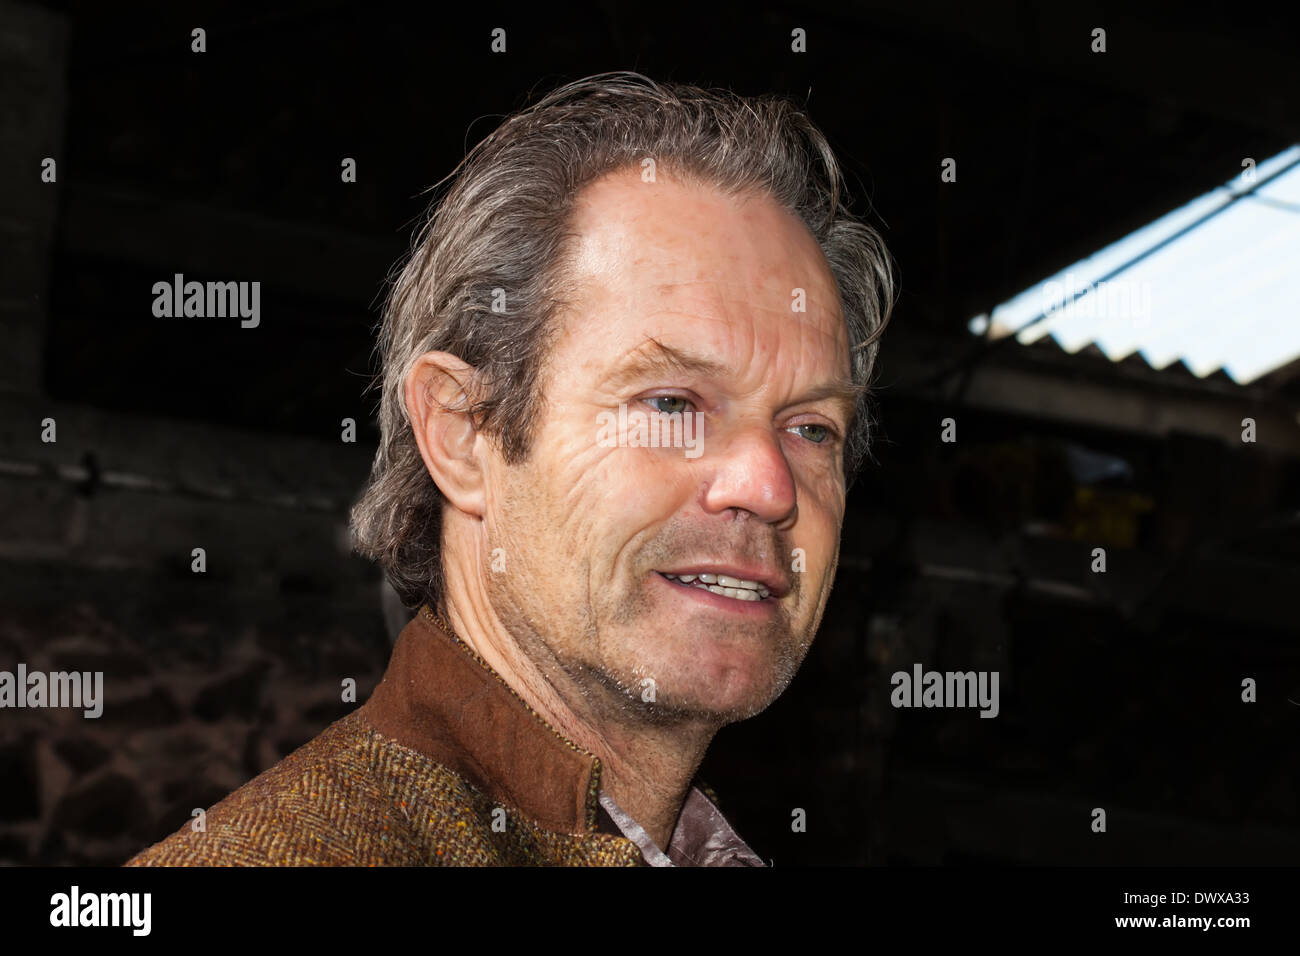 Chris Jagger, rock musician brother of Rolling Stones Mick Jagger Stock Photo